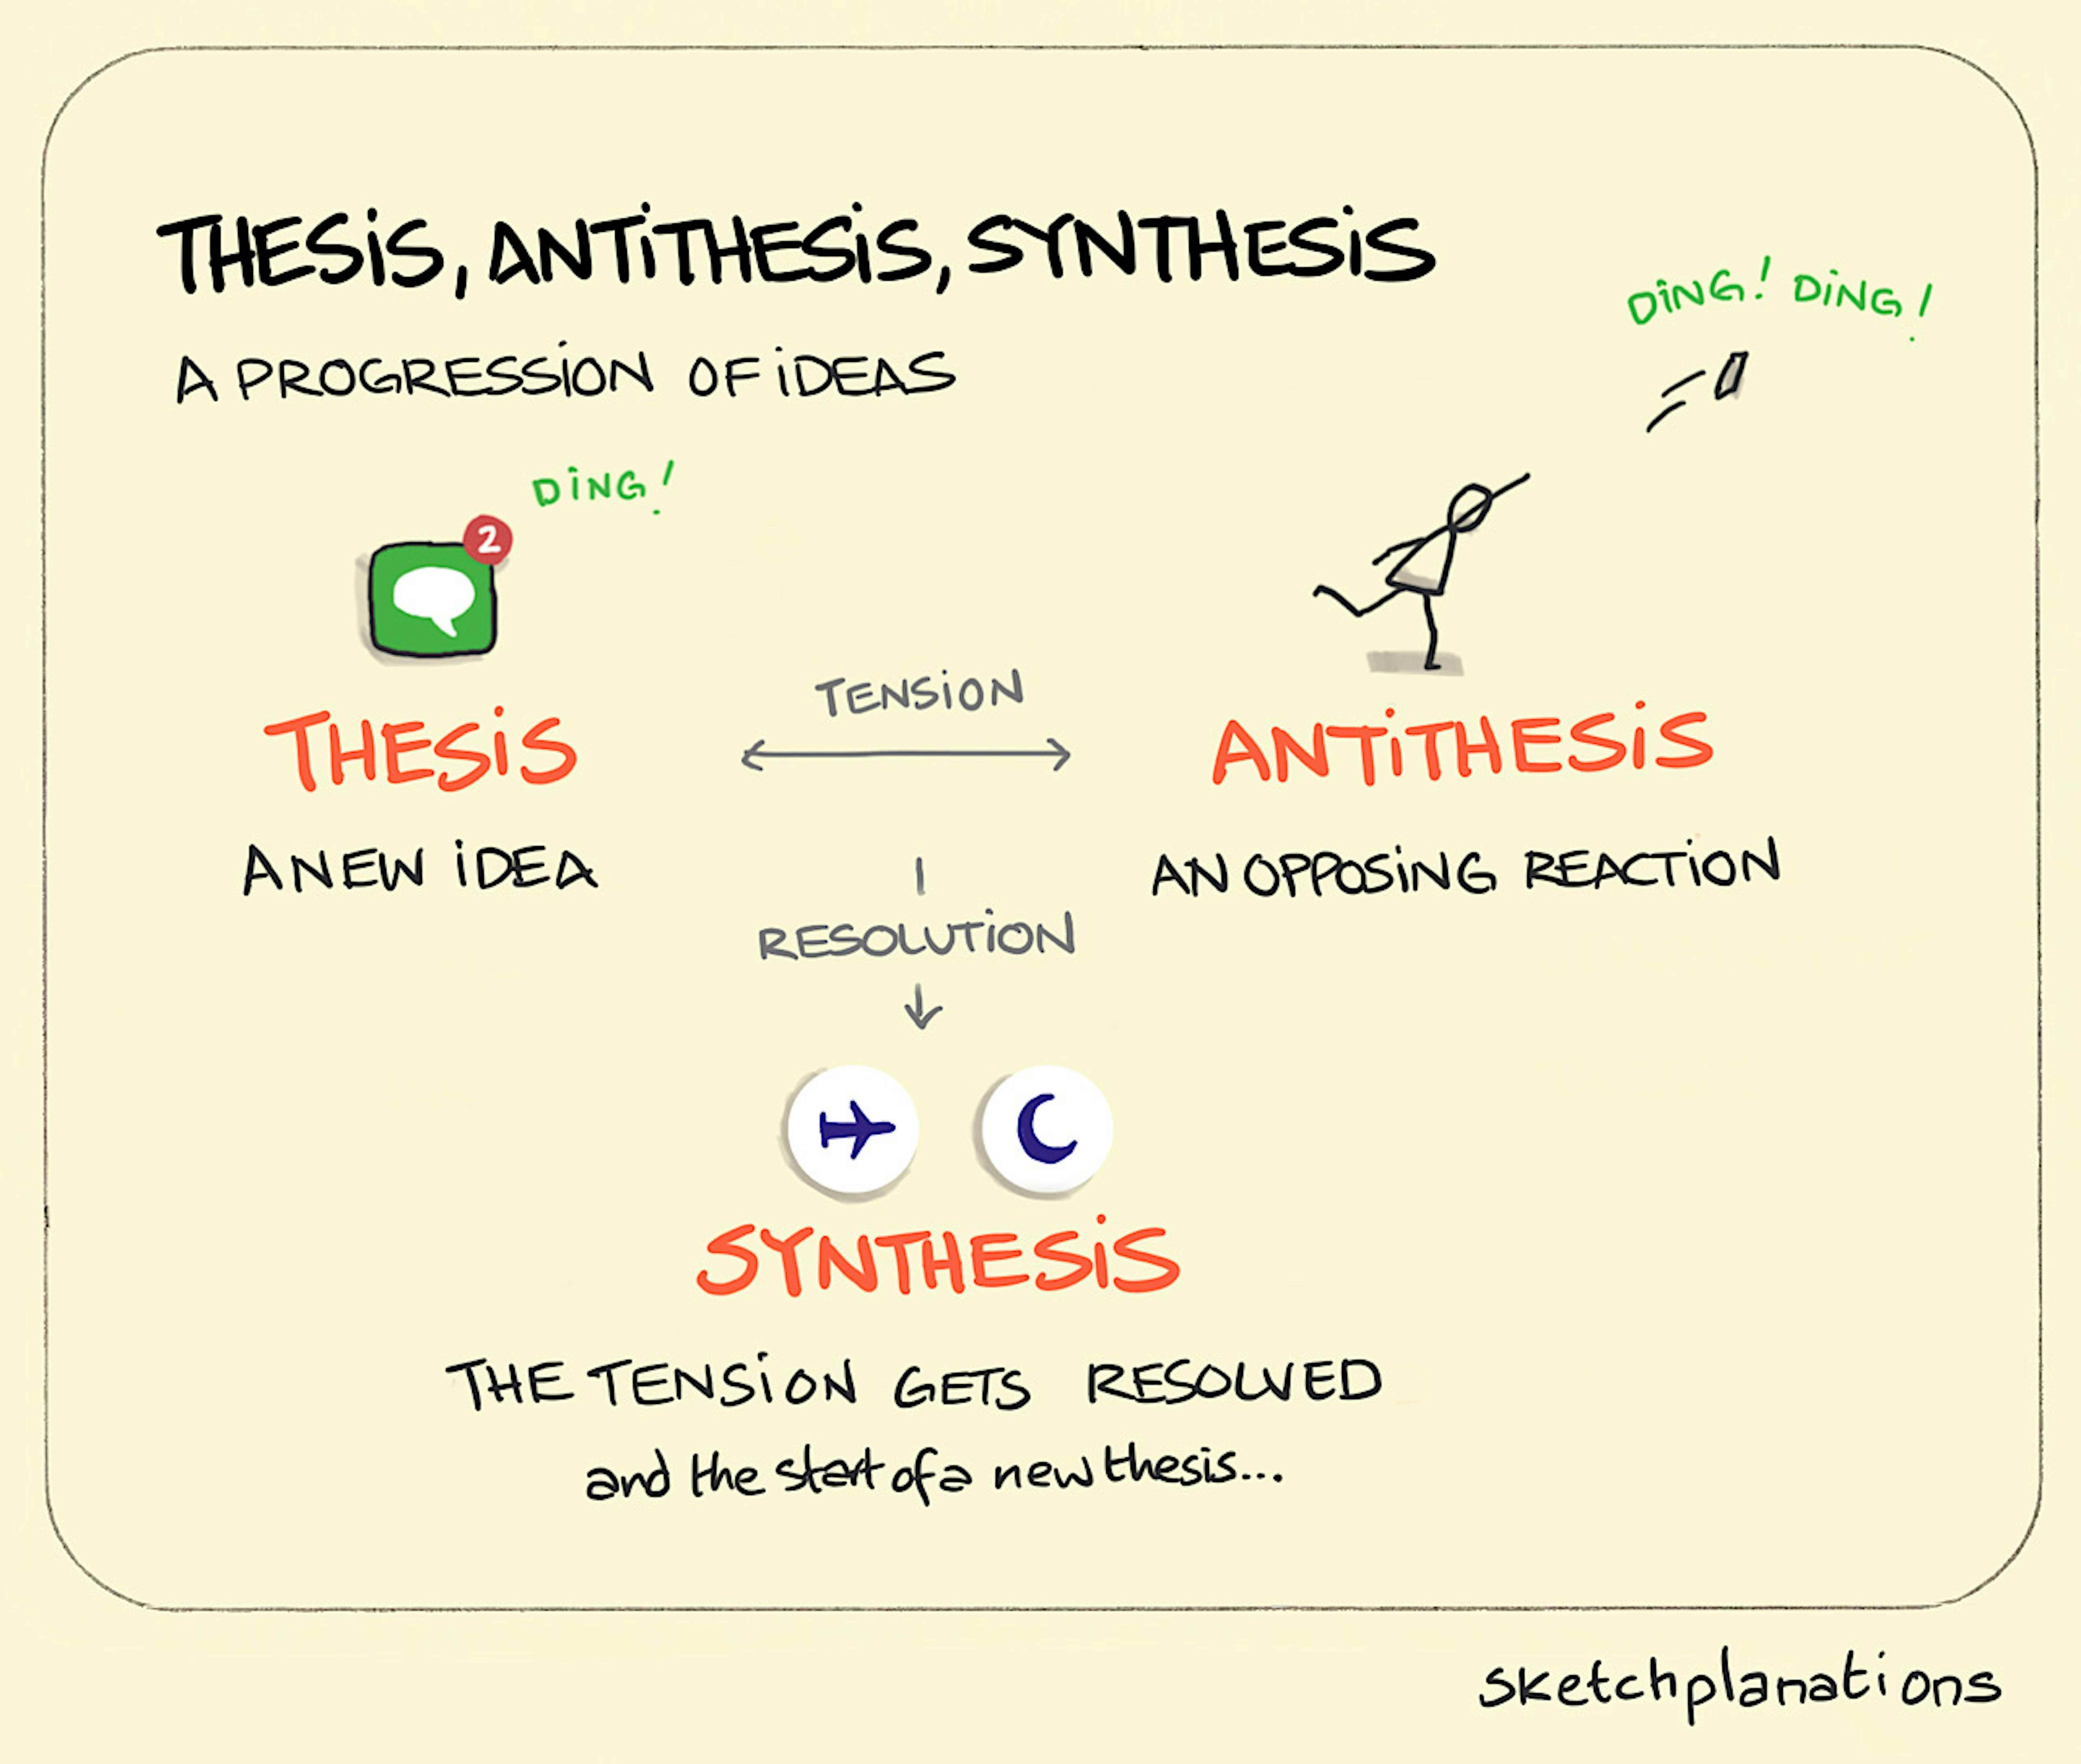 who came up with thesis antithesis synthesis